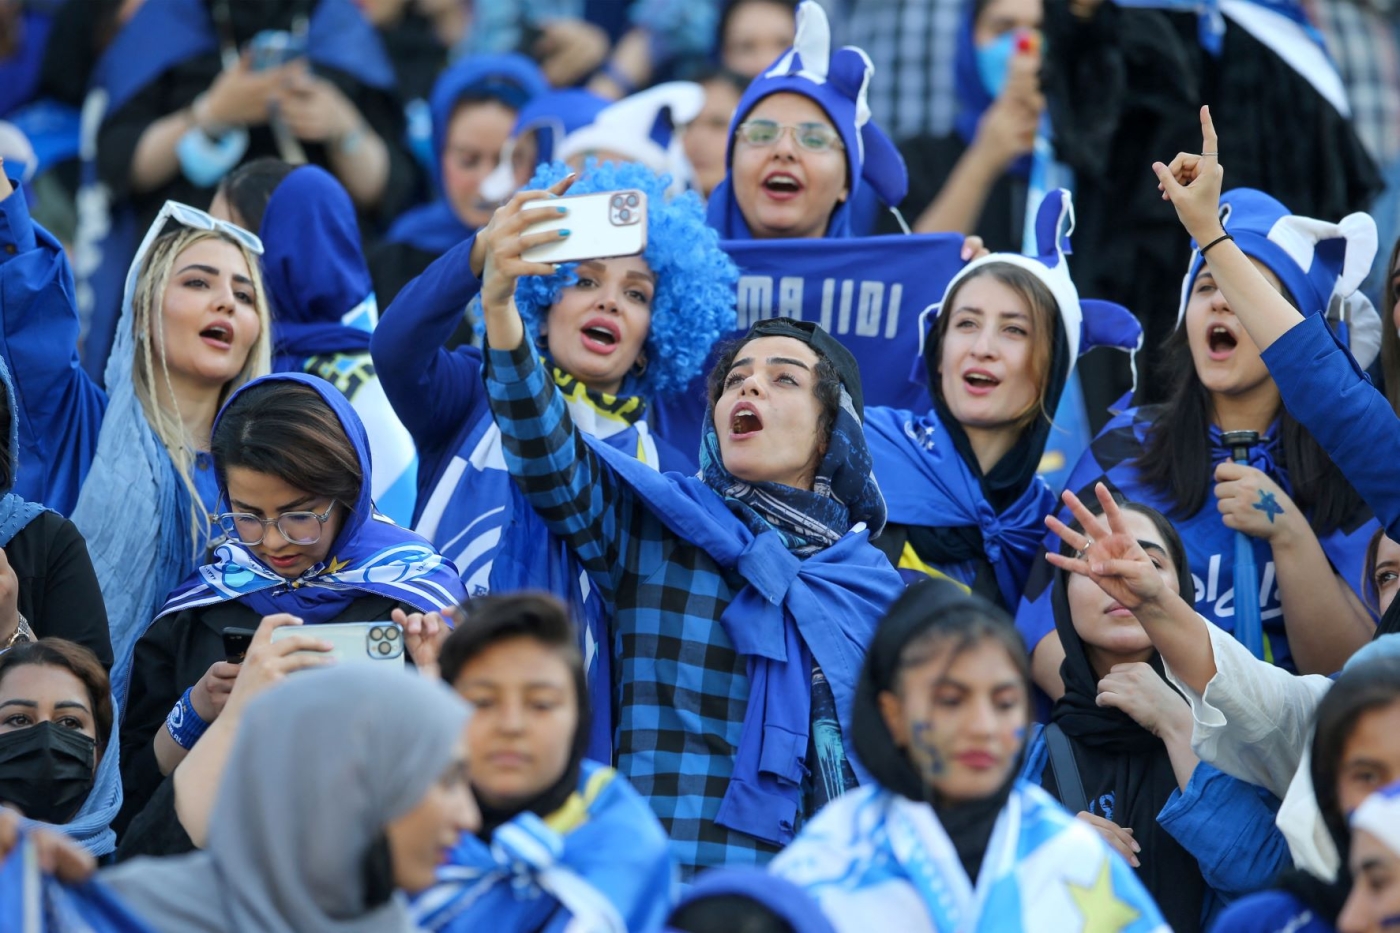 Iranian women fans of Esteghlal football club cheer during a match between Esteghlal and Mes Kerman at the Azadi stadium in the capital Tehran, on August 25, 2022 (AFP)